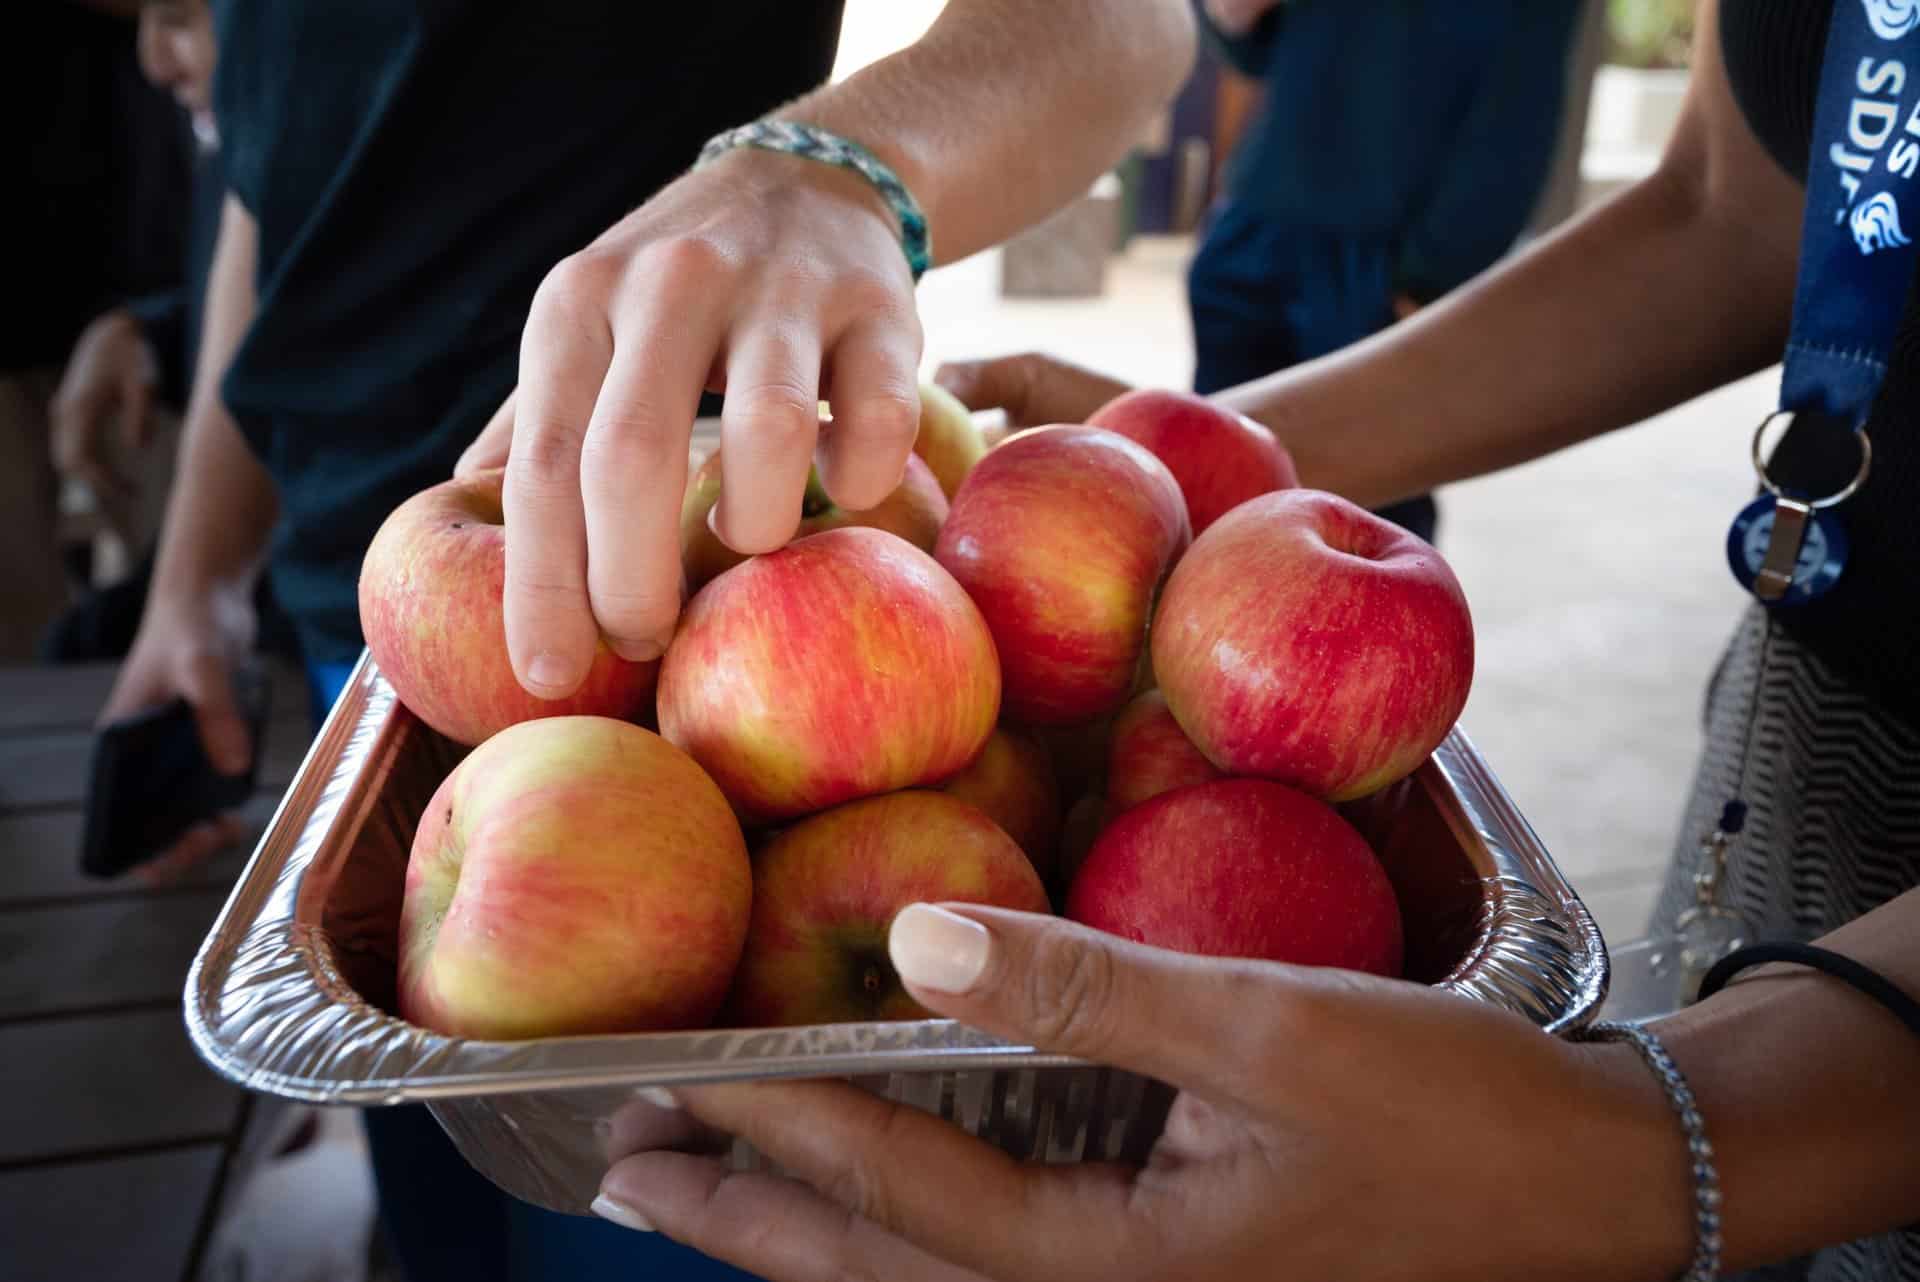 student hands grabbing apples from a tray